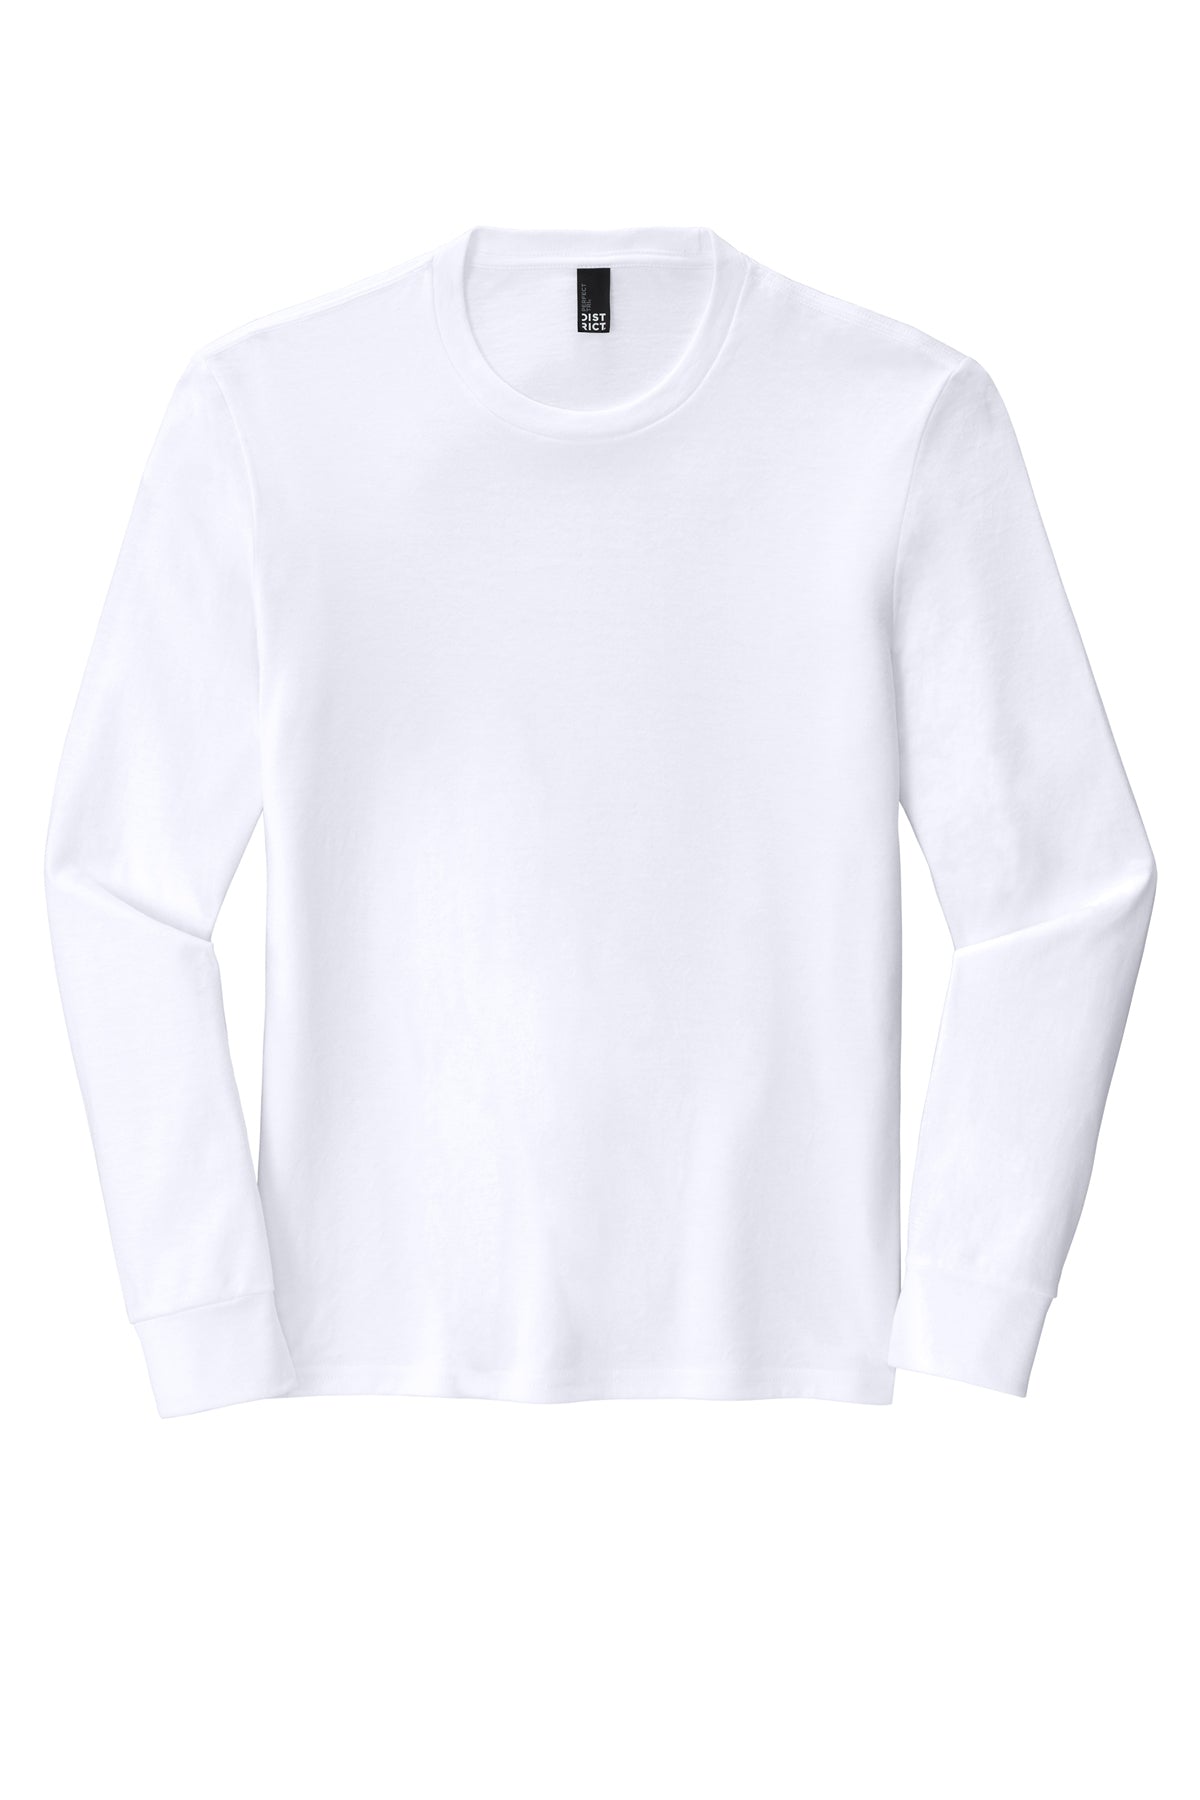 DM132 District ® Perfect Tri ® Long Sleeve Tee